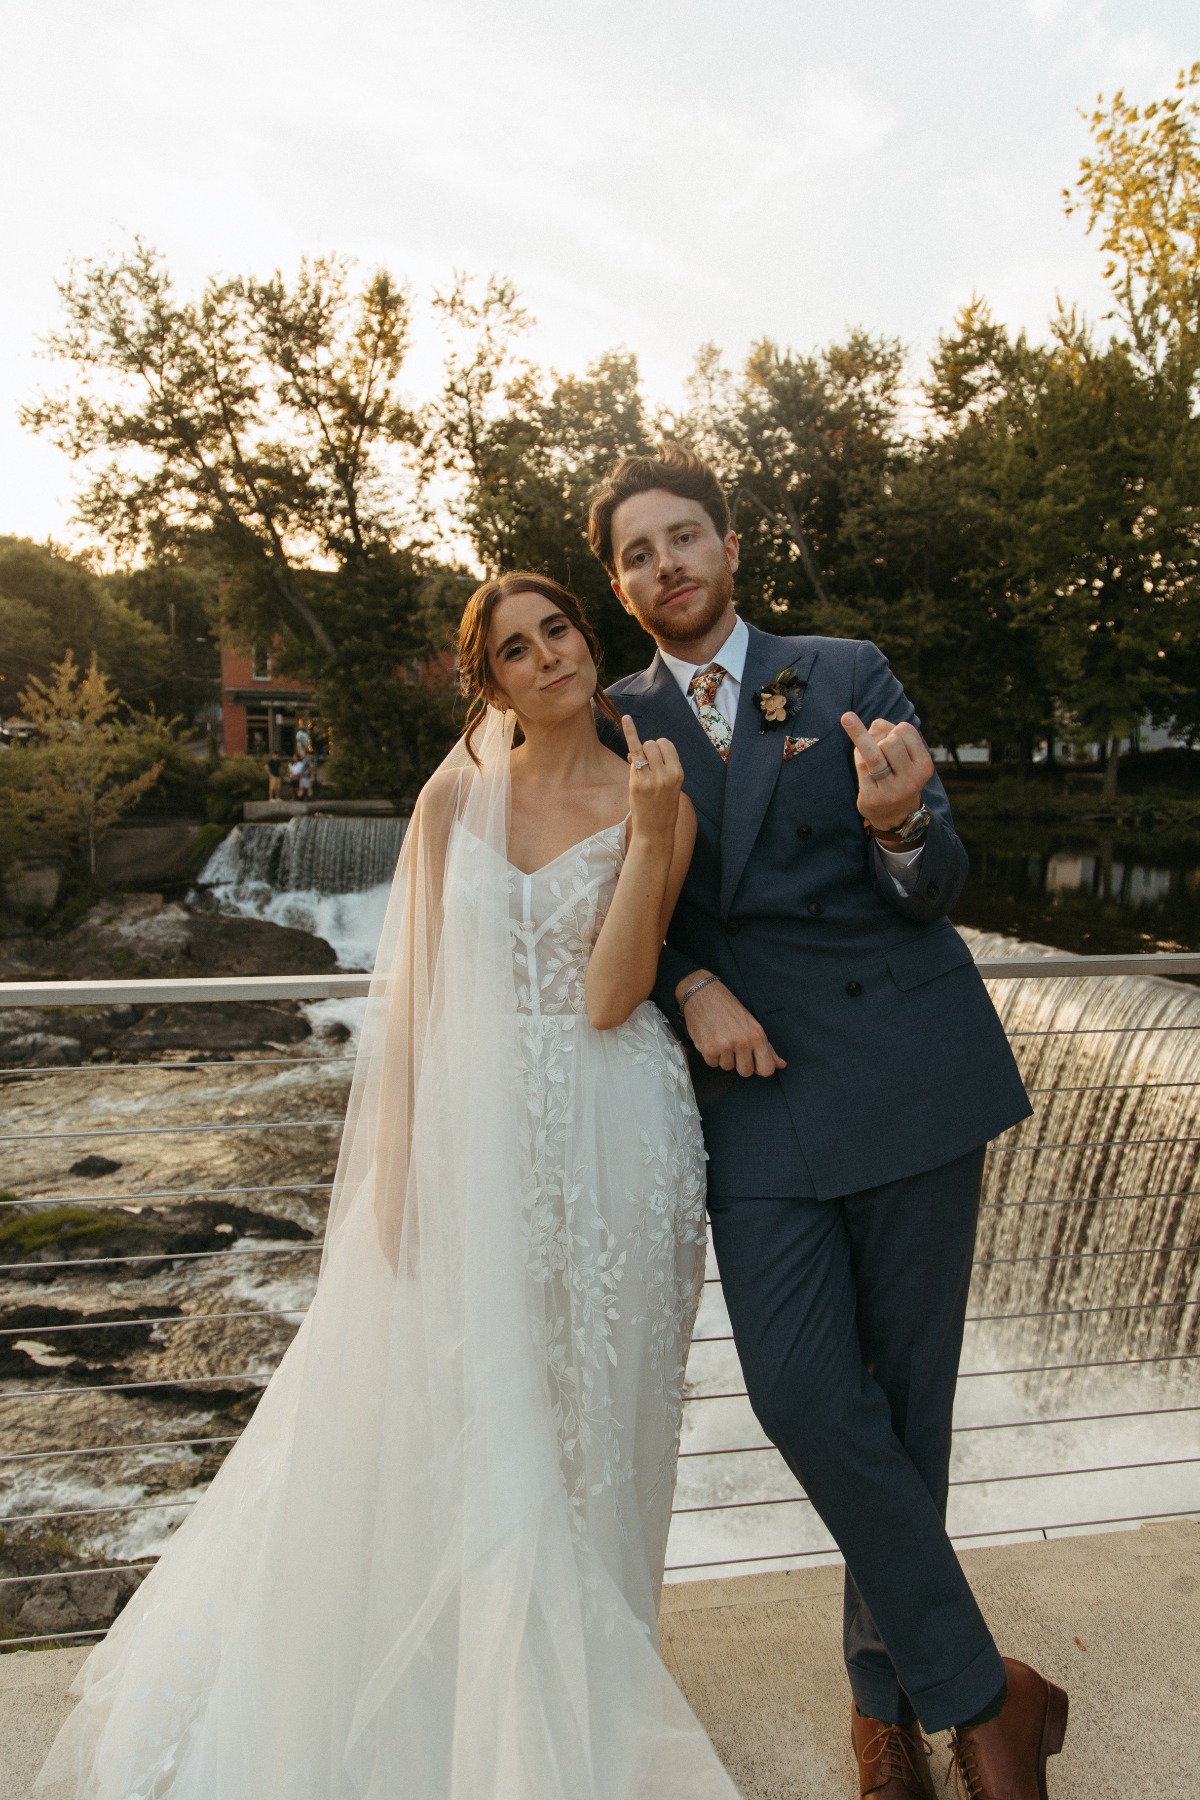 Playful bride and groom sunset photos with waterfall